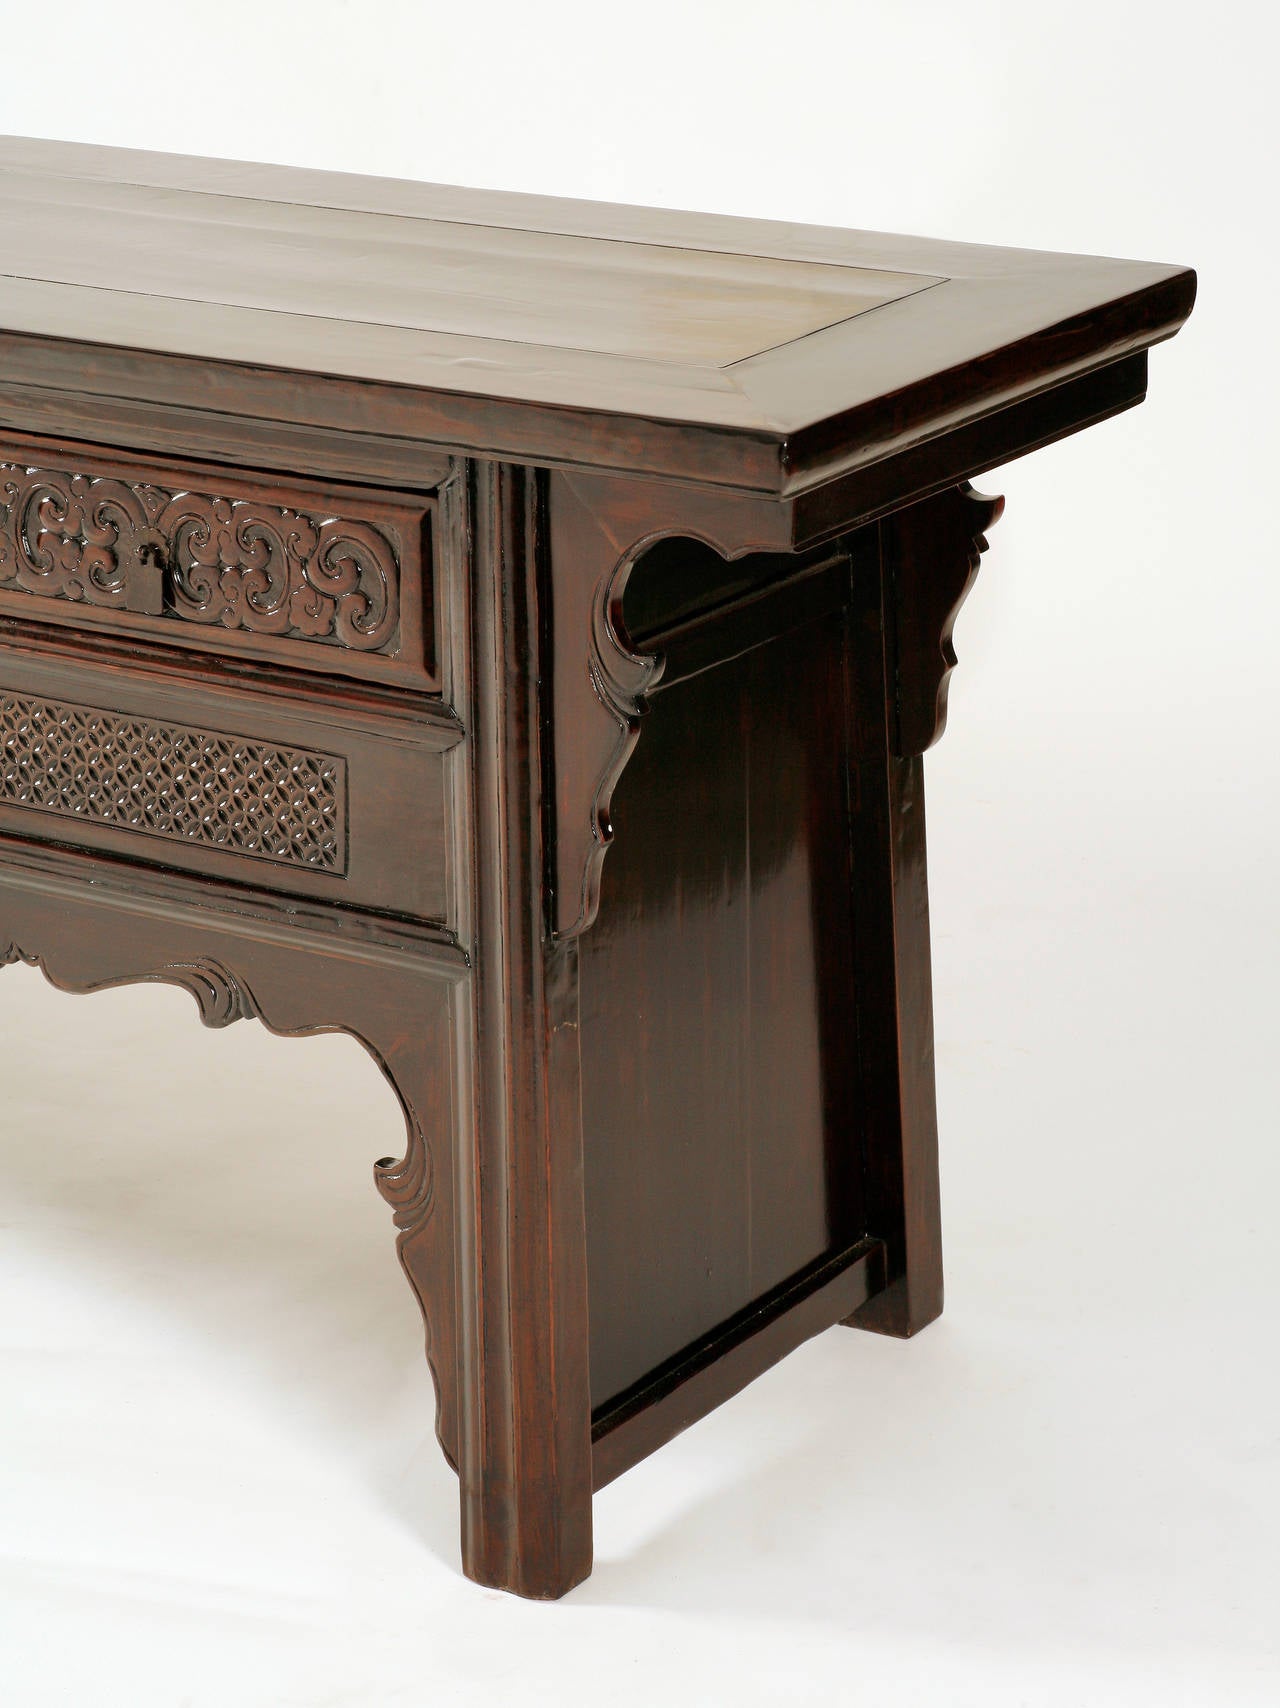 The walnut (hetao mu) raised coffer topped with a floating panel, inset within an ice-plate edged frame, above recessed legs with carved molding, flanked by beaded curvilinear spandrels, a top row of four drawers above a row of three panels with a